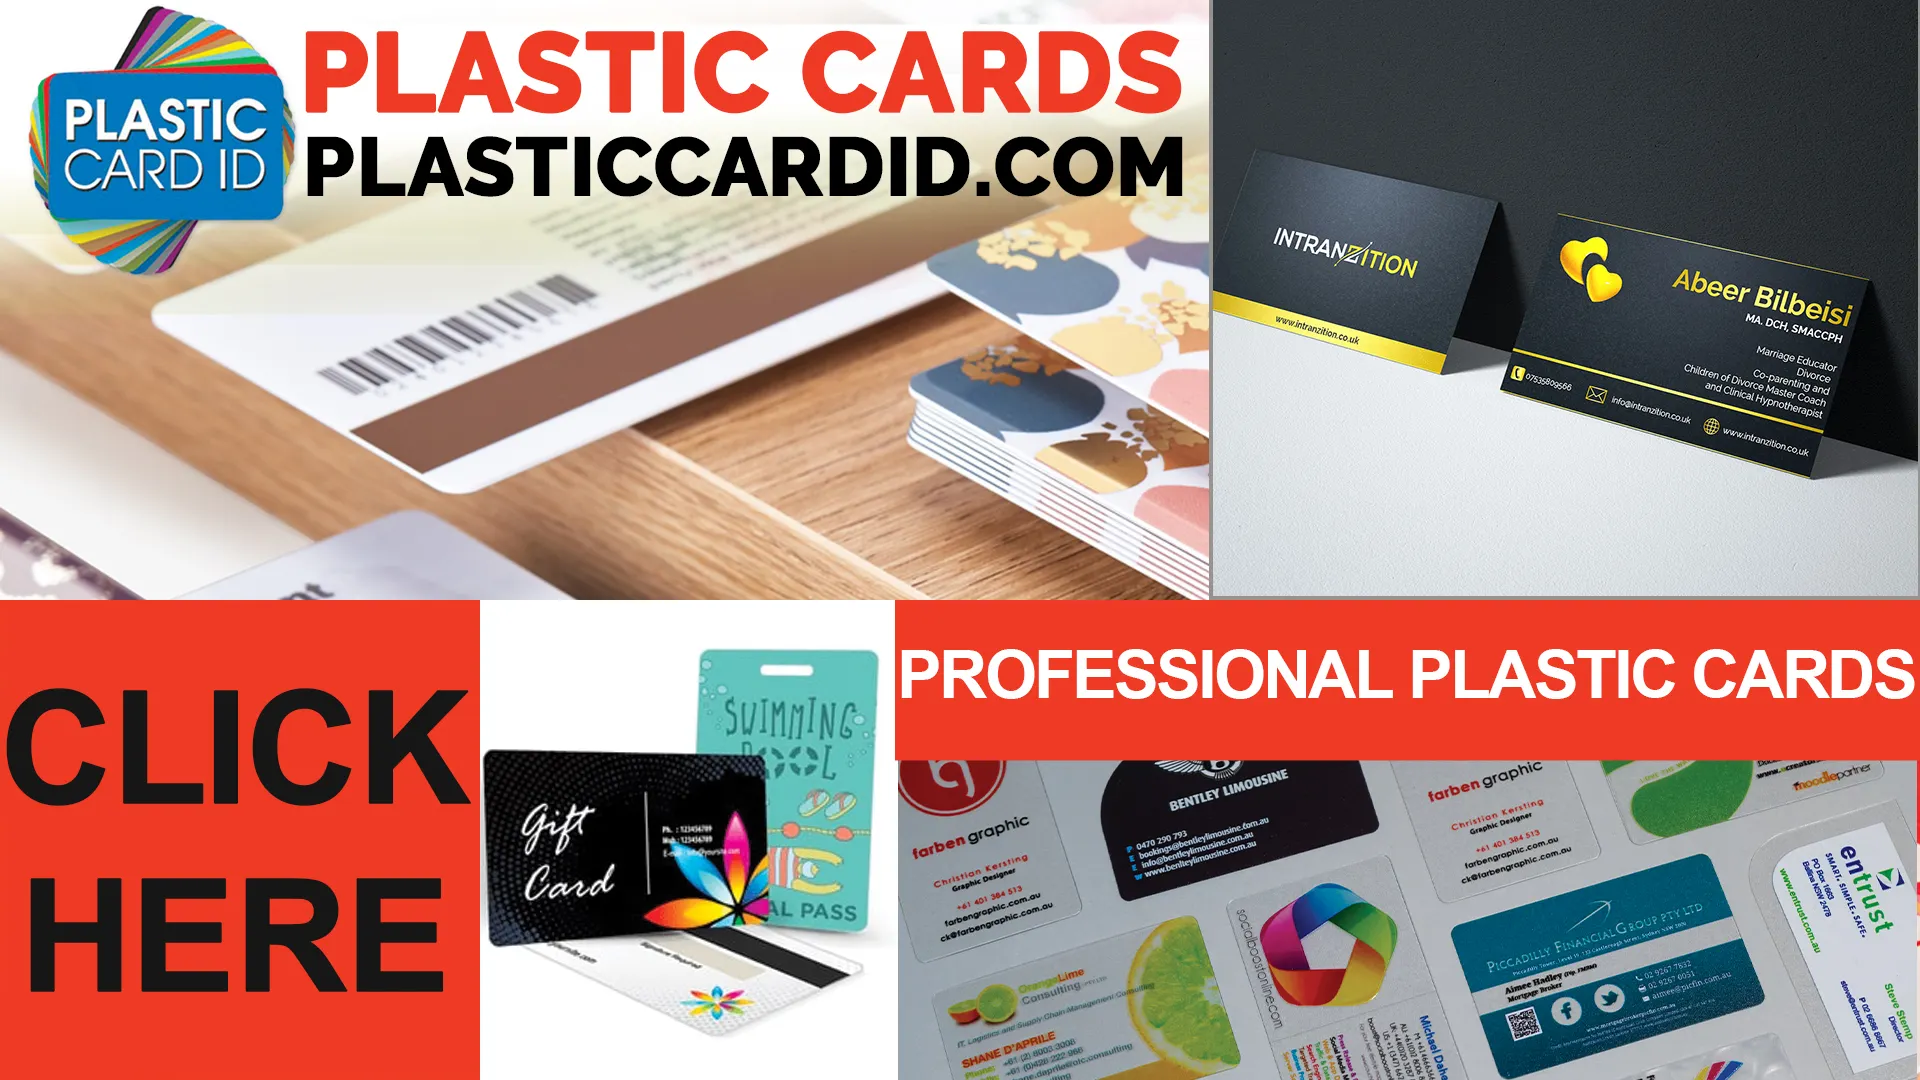 Welcome to the Digital Transformation of Plastic Cards